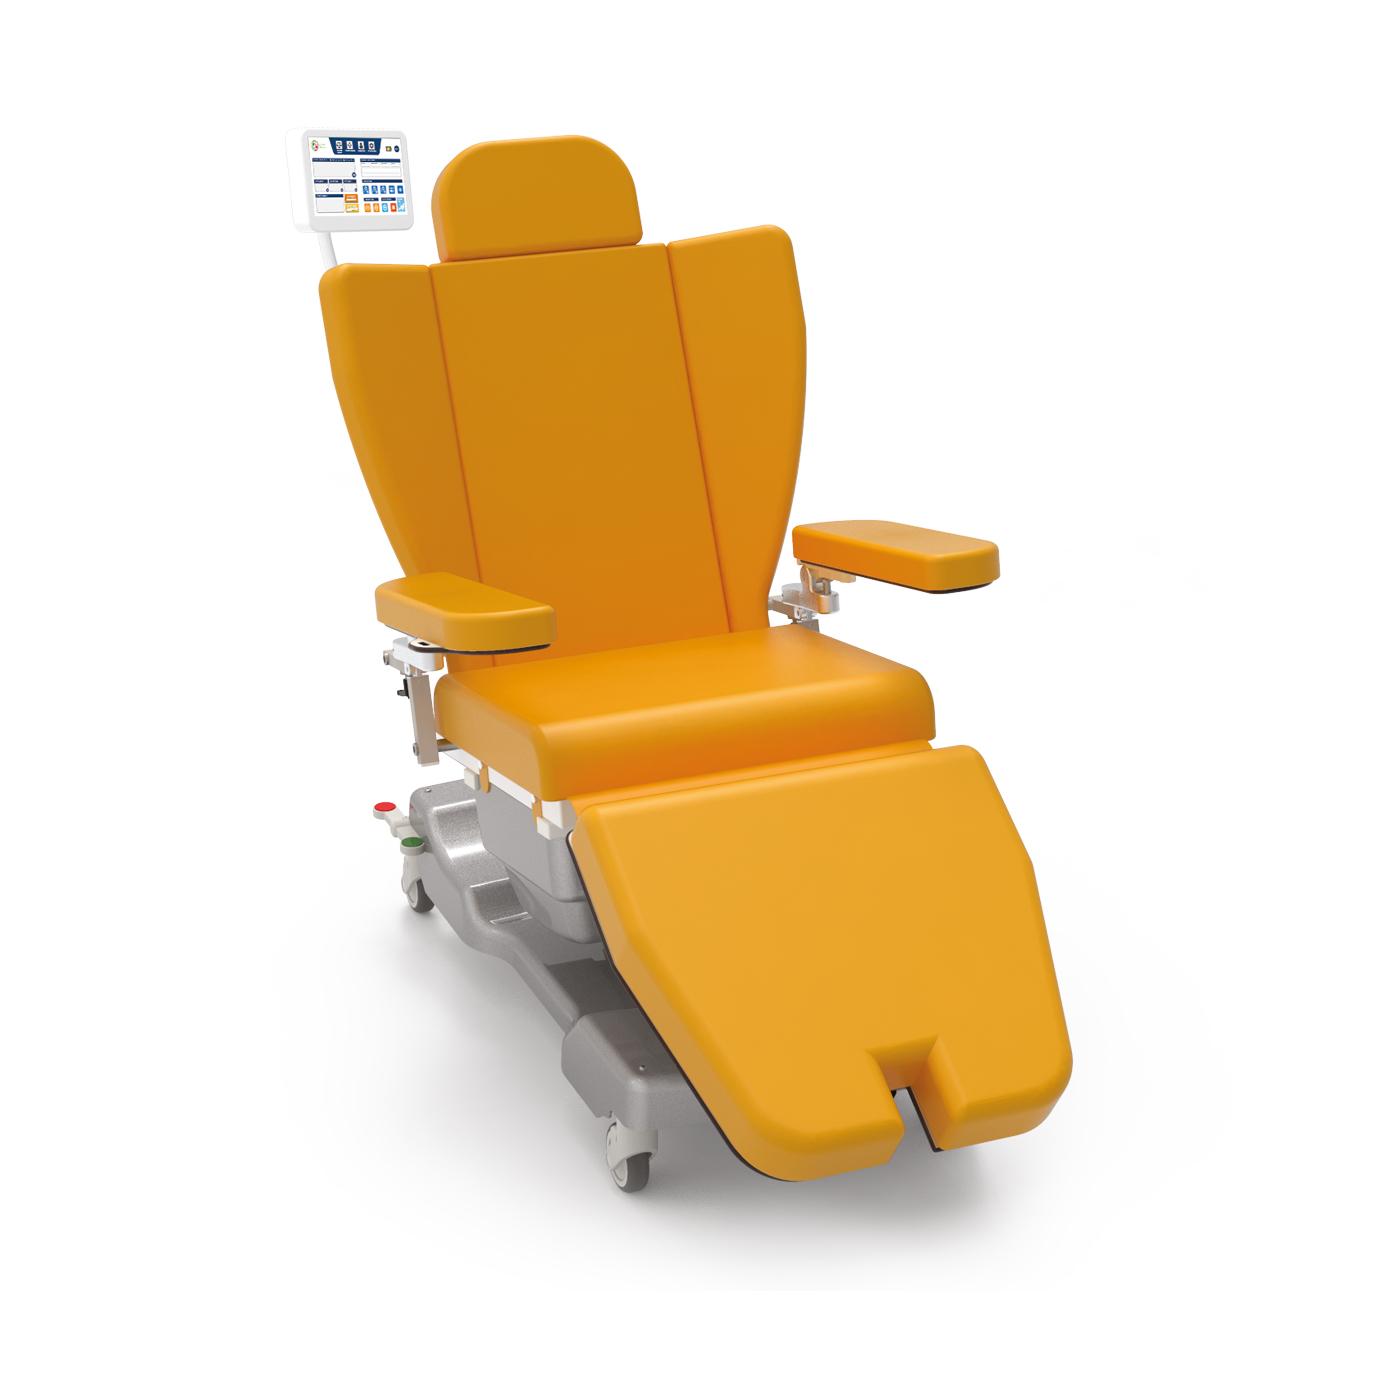 Our medical treatment infusion therapy chair features padded upholstery for increased patient comfort.